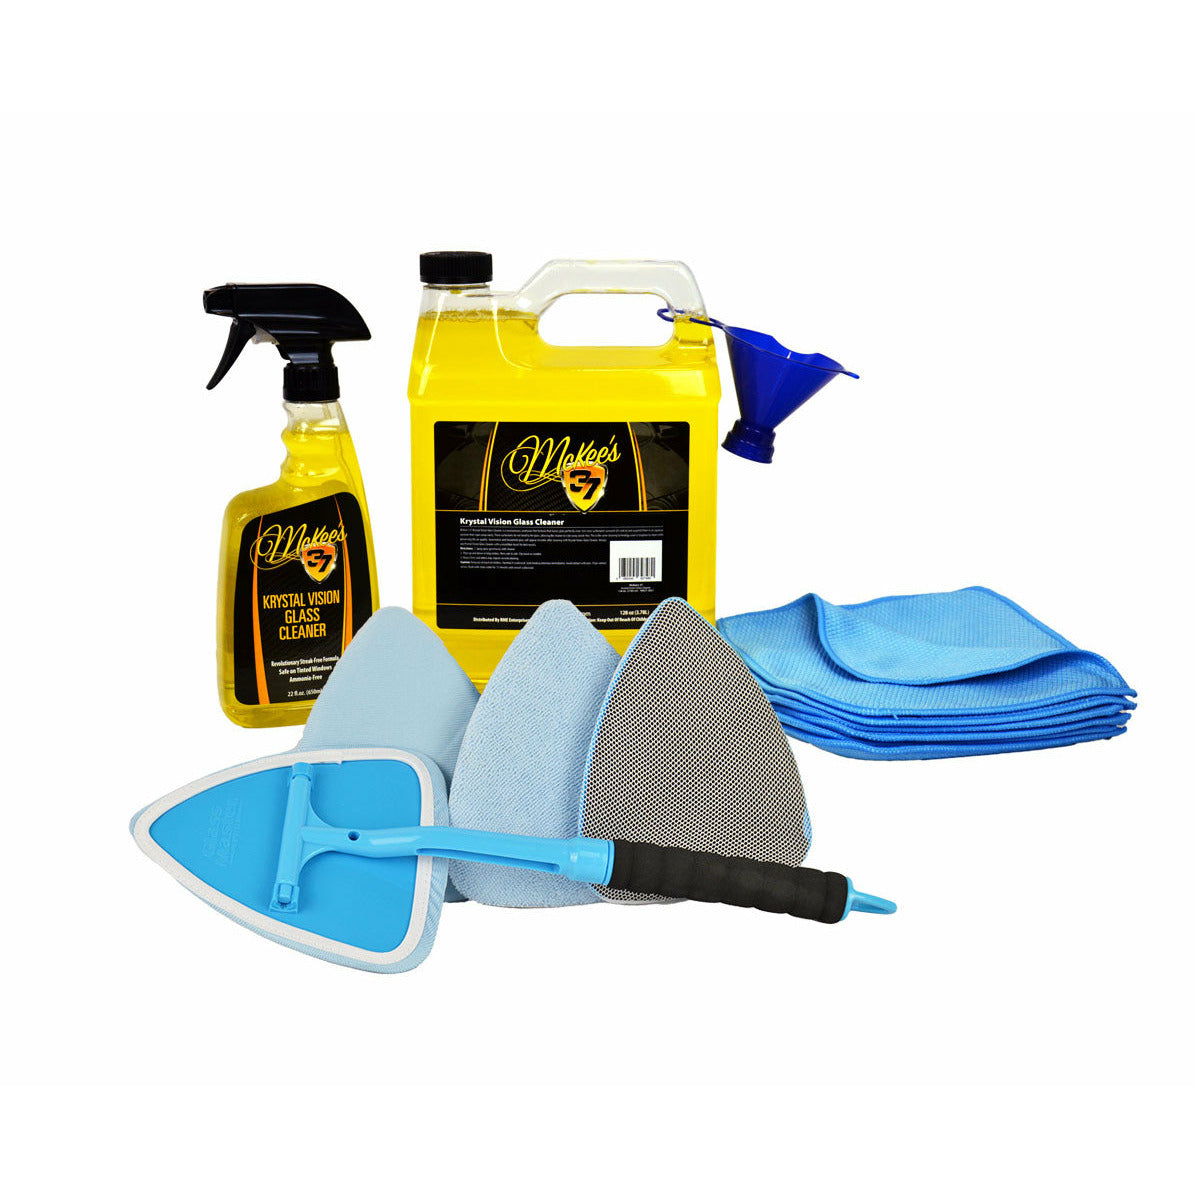 Glass Master Pro 150 oz. Glass Cleaning Kit 